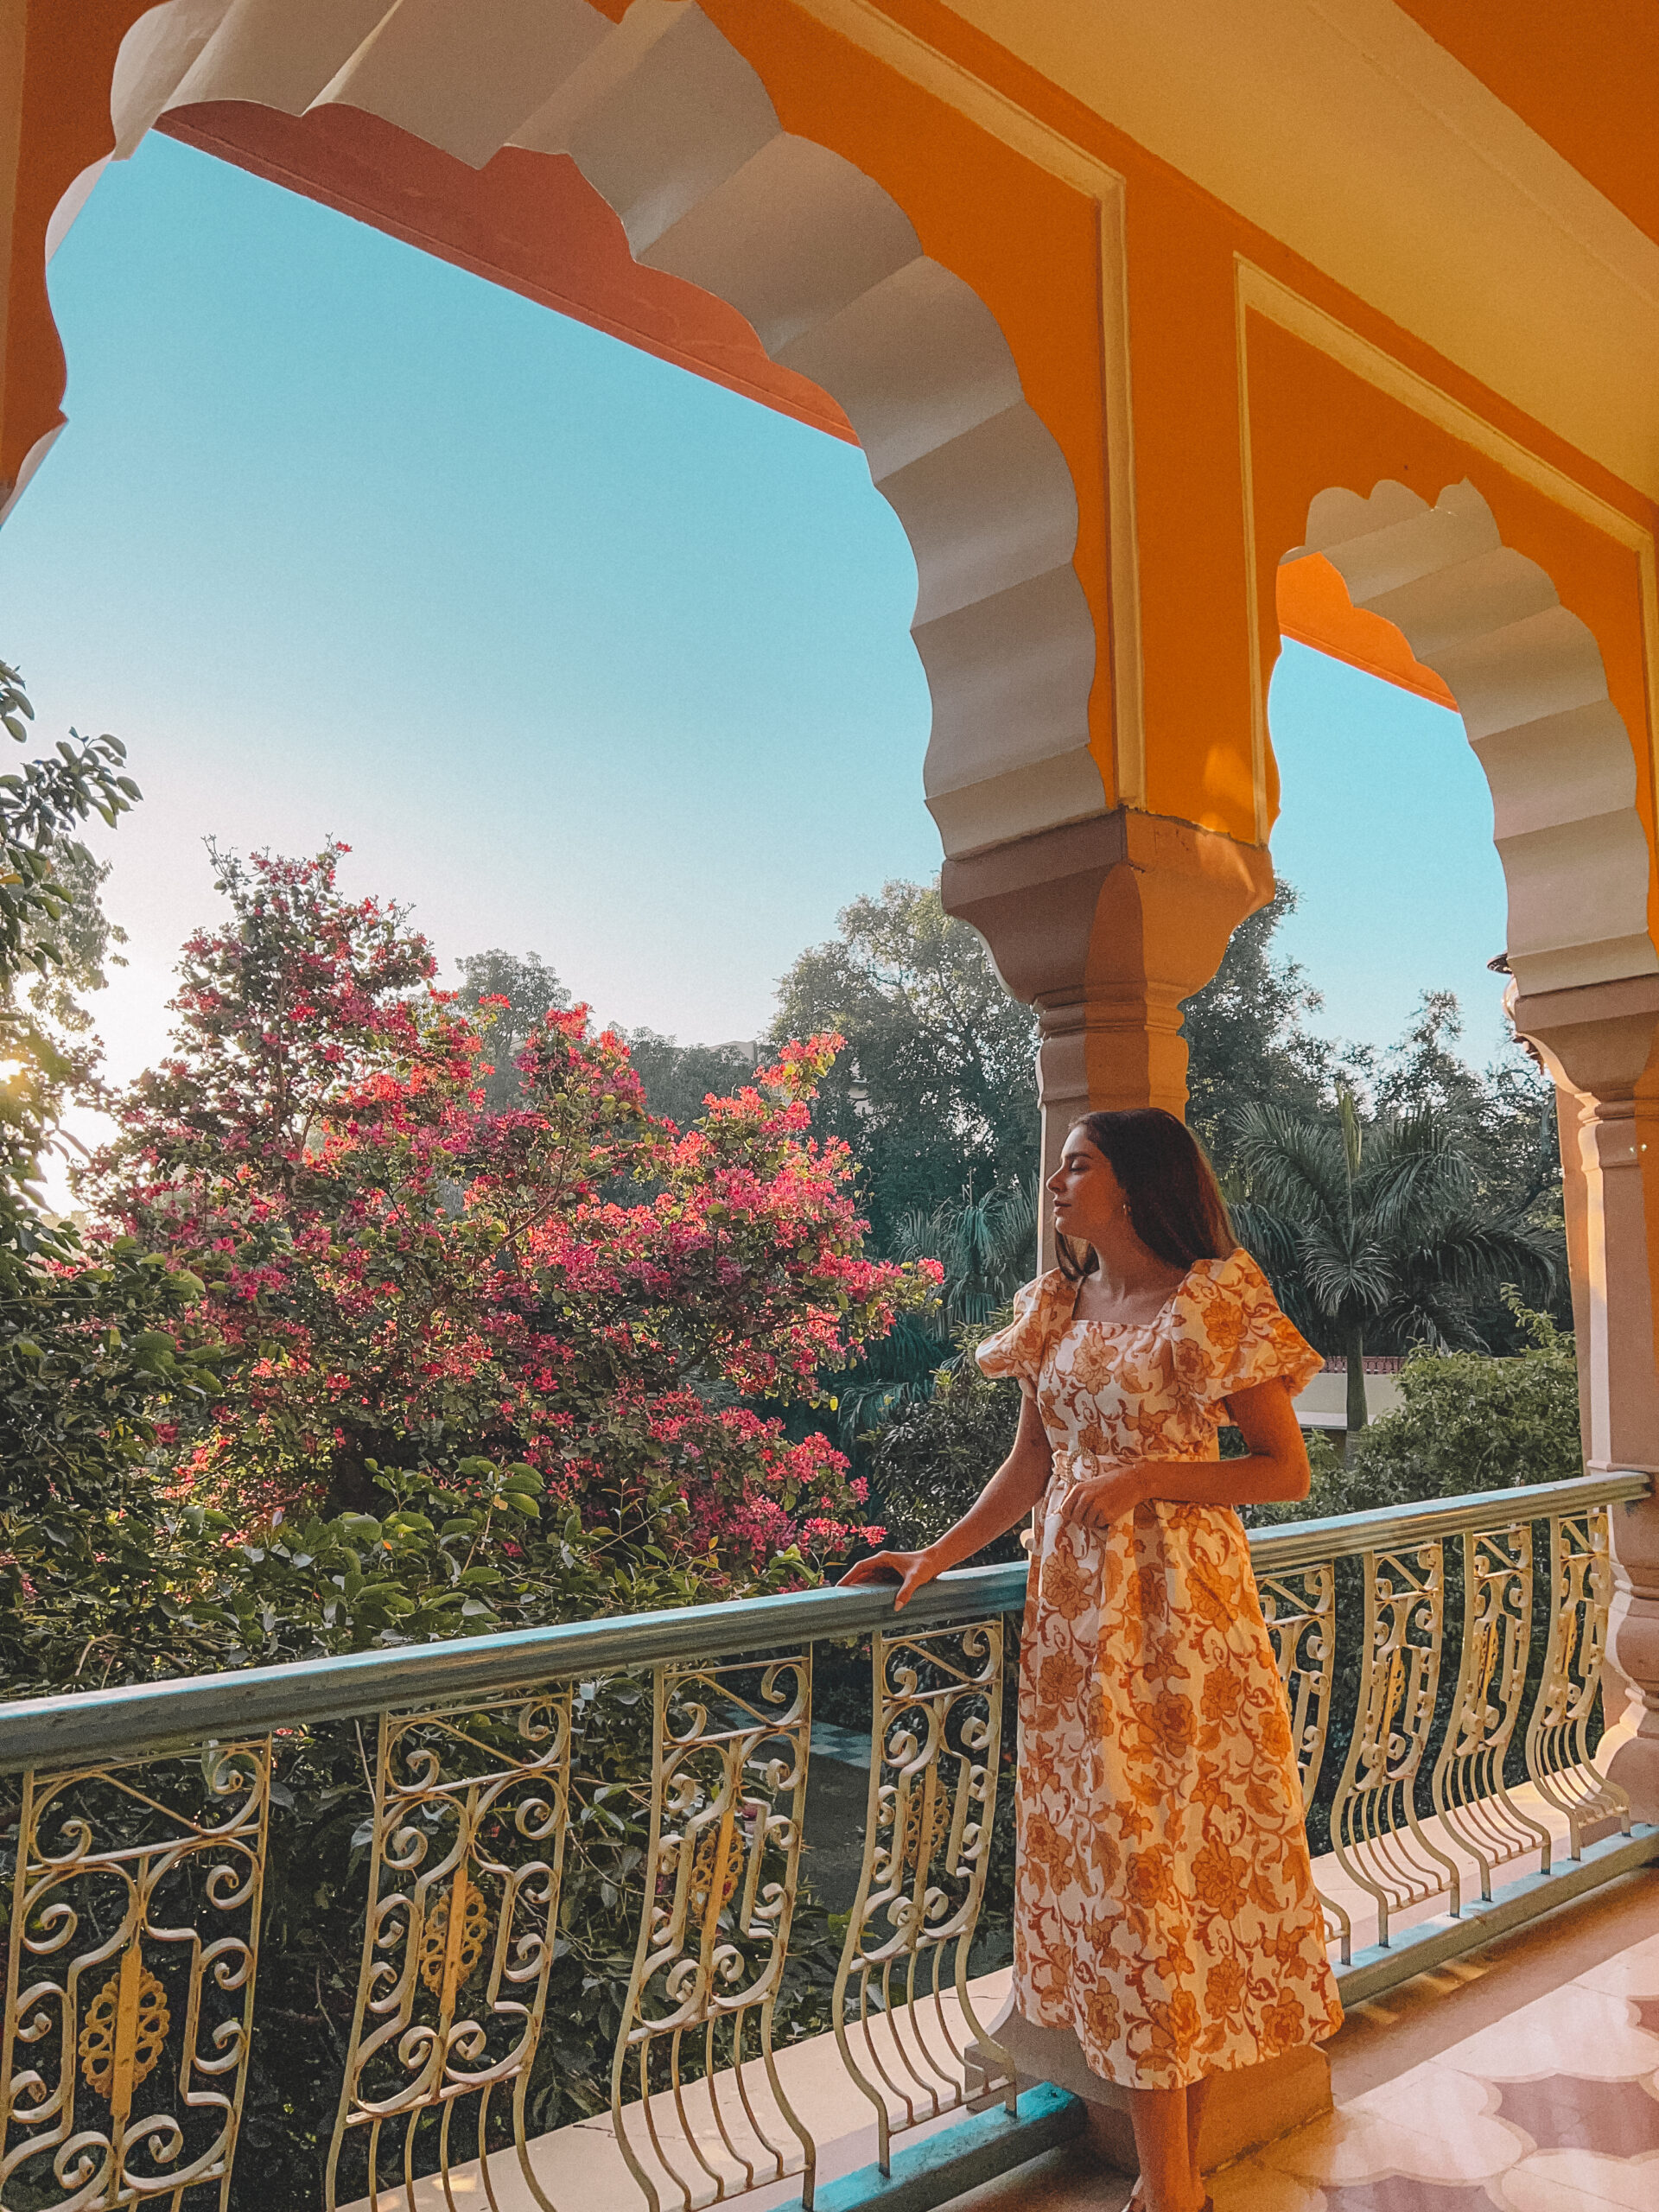 How to Spend 2 Days in Jaipur, India: 10 Things to do in Jaipur